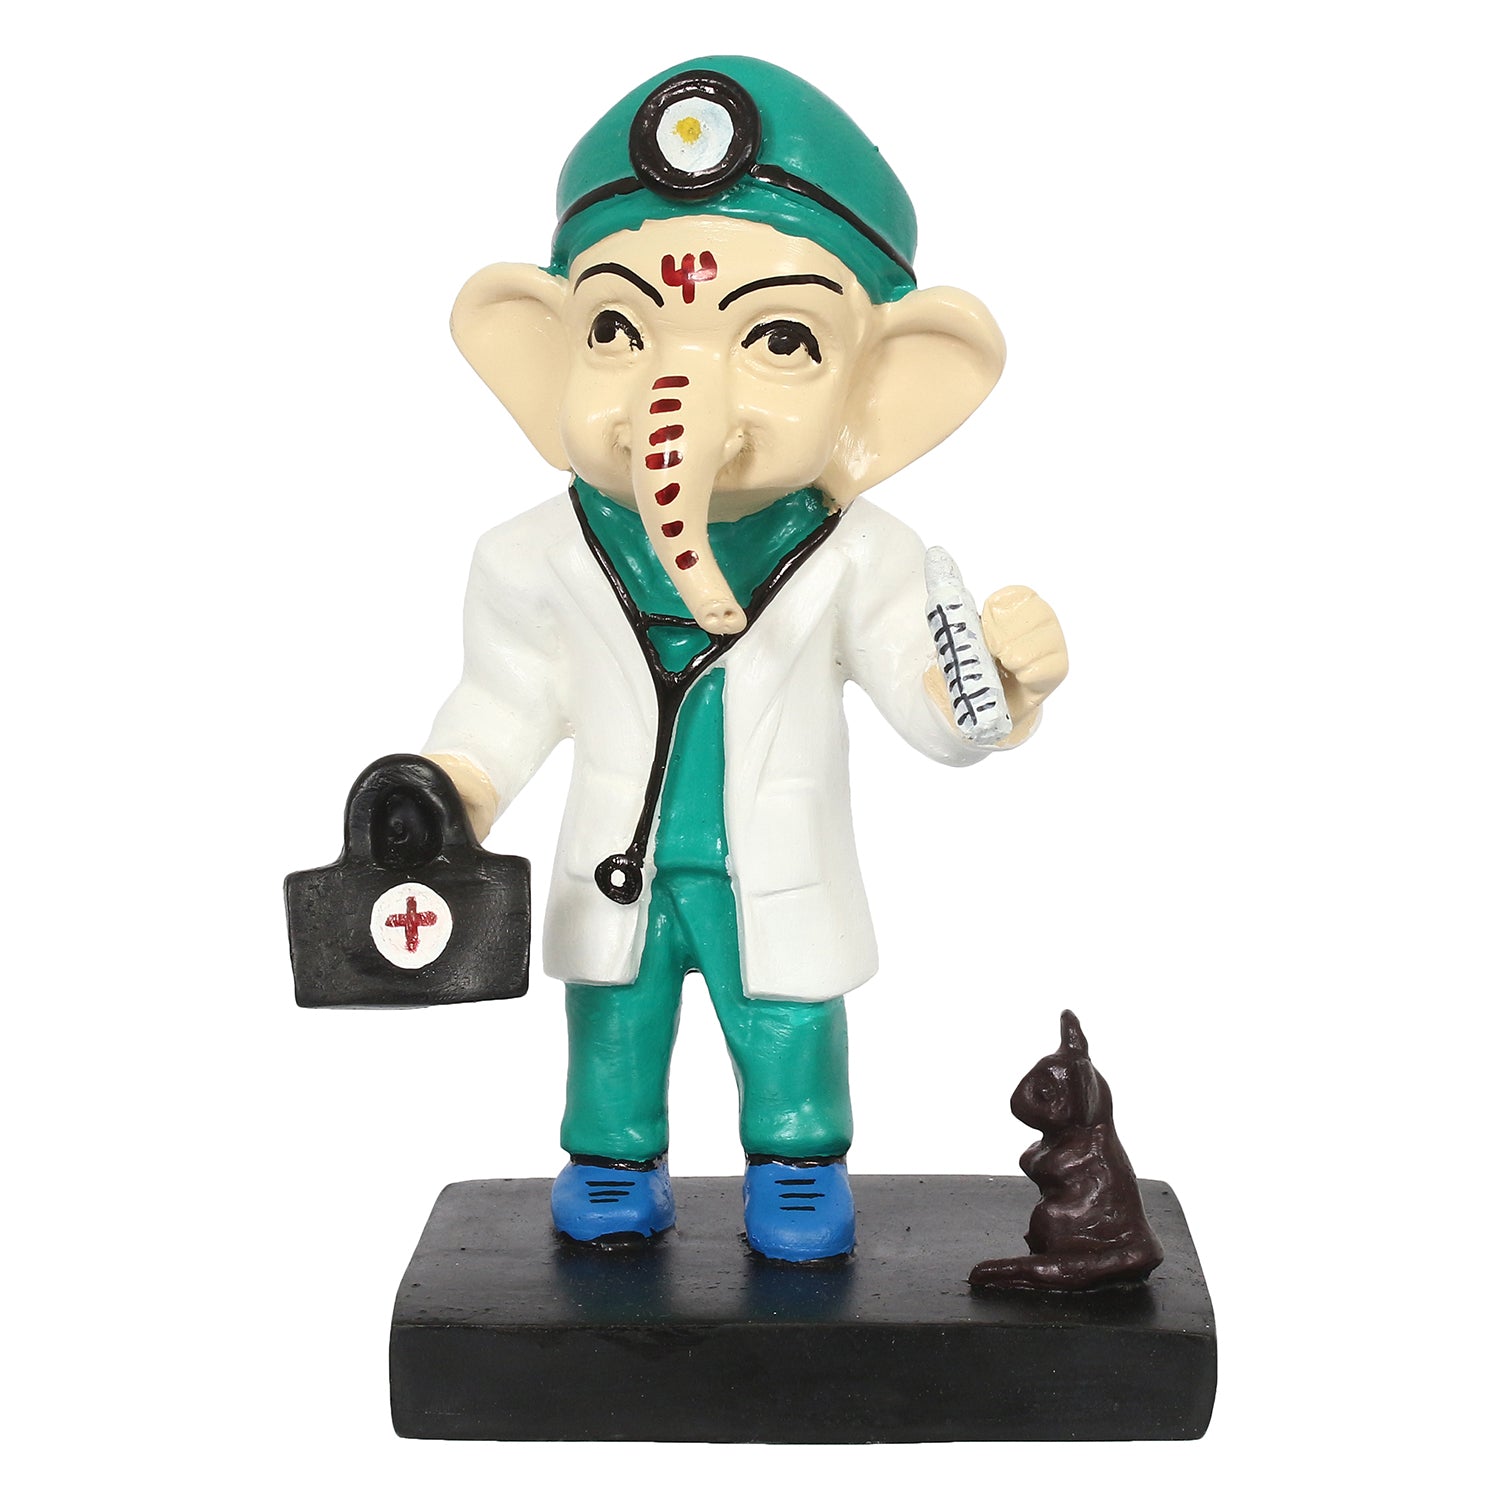 Polyresin Decorative Lord Ganesha Idol in Doctor Avatar (Green, White, Black and Blue) 2